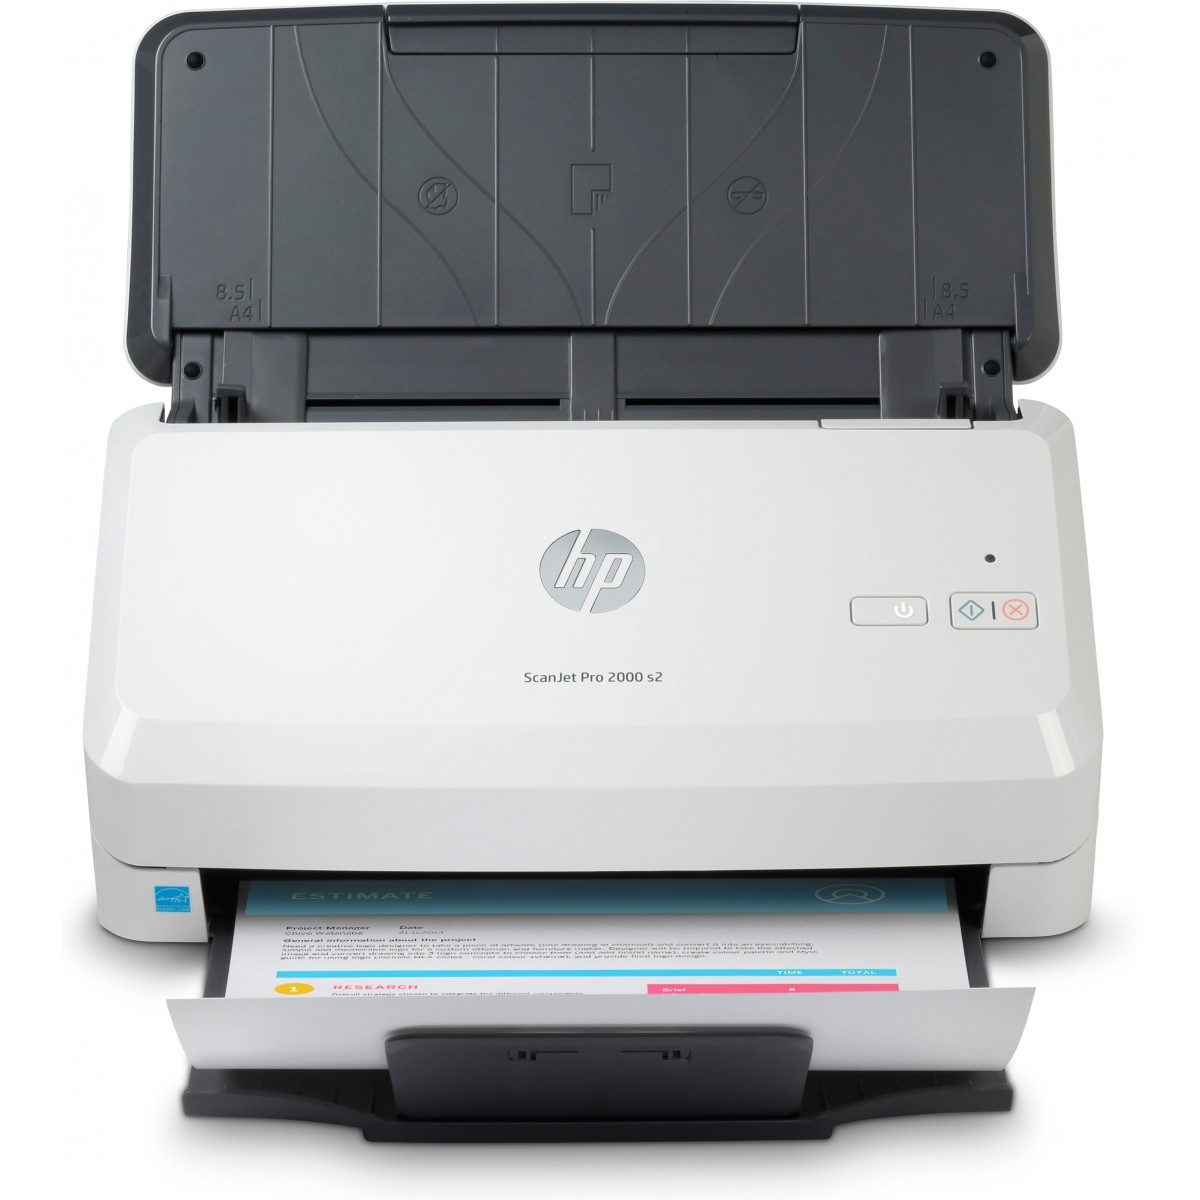 HP Scanjet Pro 2000 s2 - 216 x 3100 mm - 600 x 600 DPI - 3500 pages - Sheet-fed scanner - Black - White - CMOS CIS